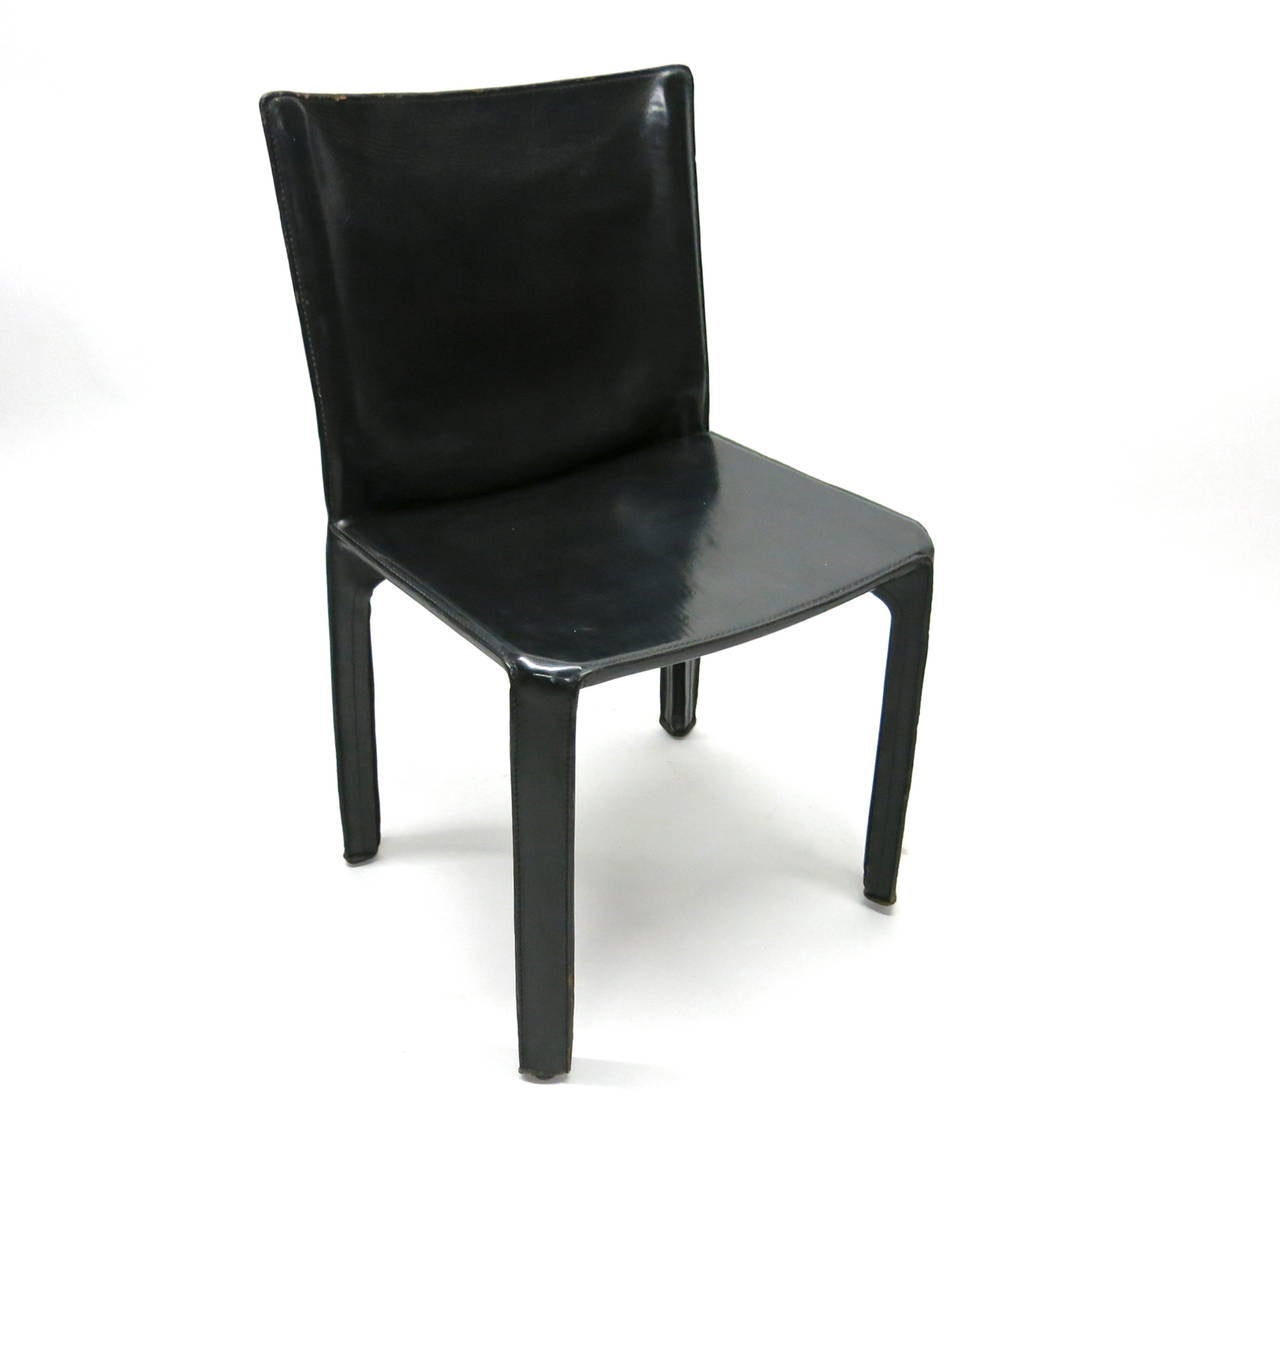 Pair of Cab Chairs Signed Cassina C-5 1976 Model No. 412 Made in Milan, Italy 1